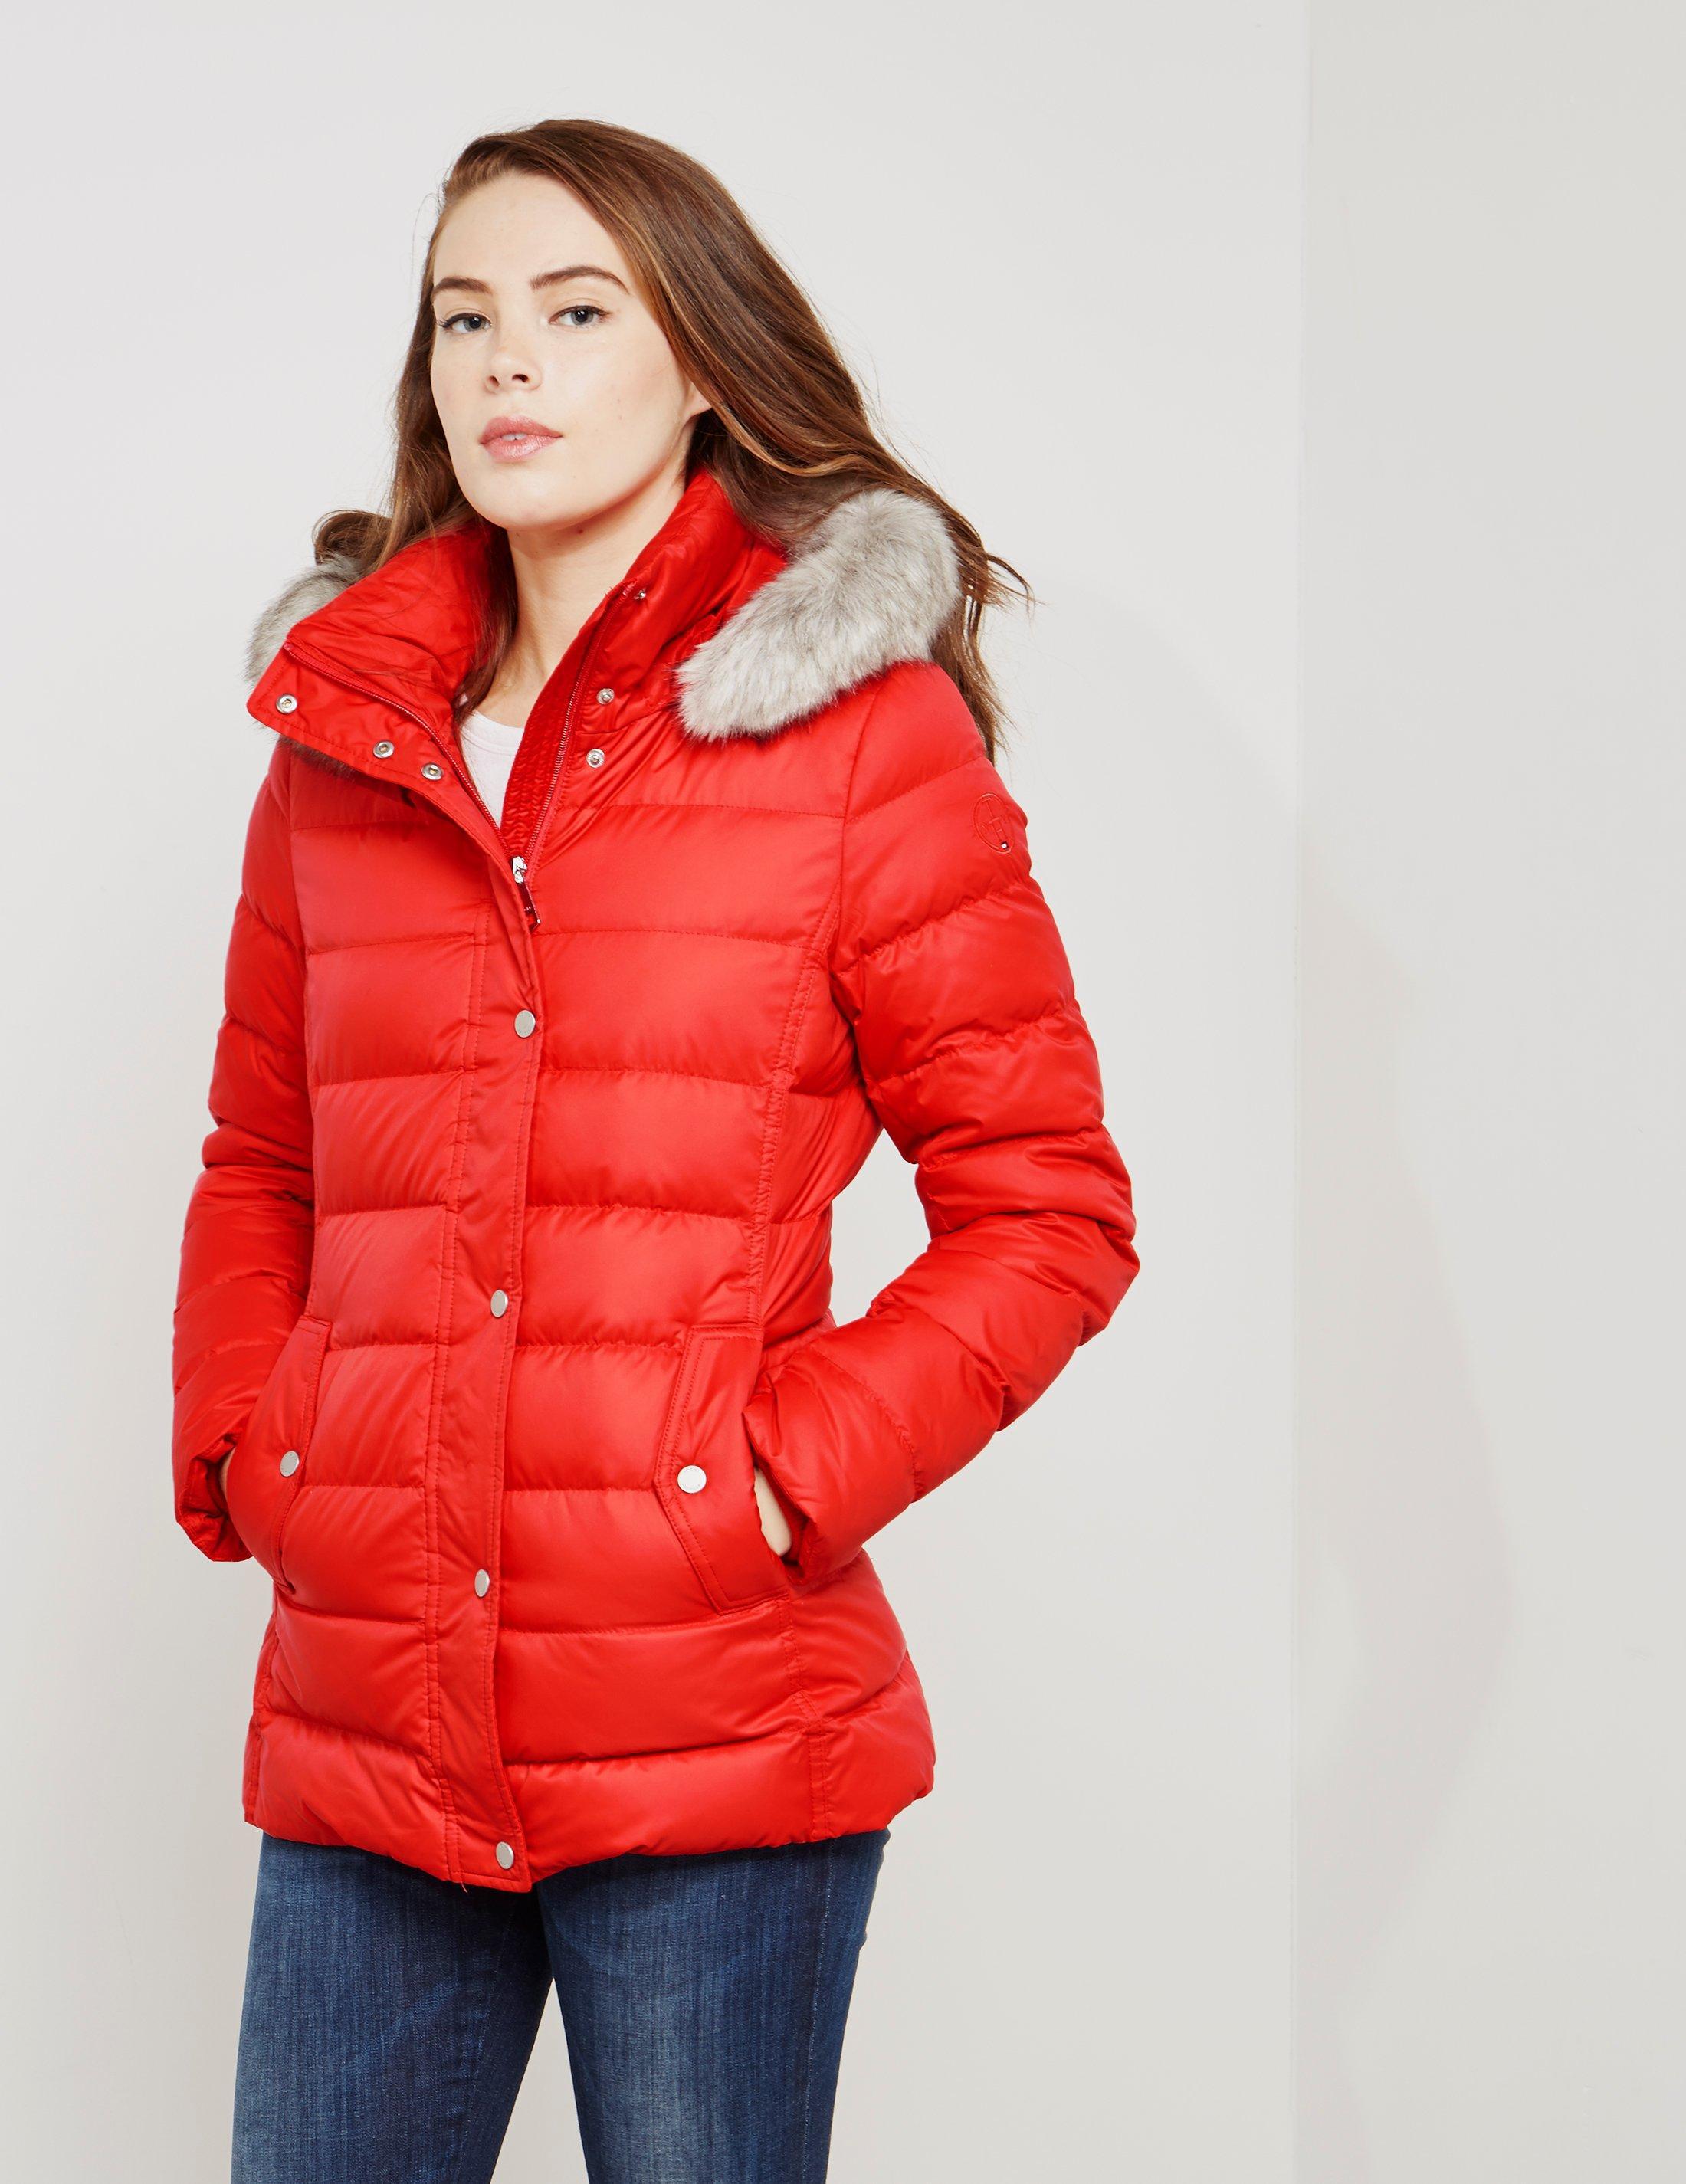 womens tommy hilfiger red coat Cheaper 